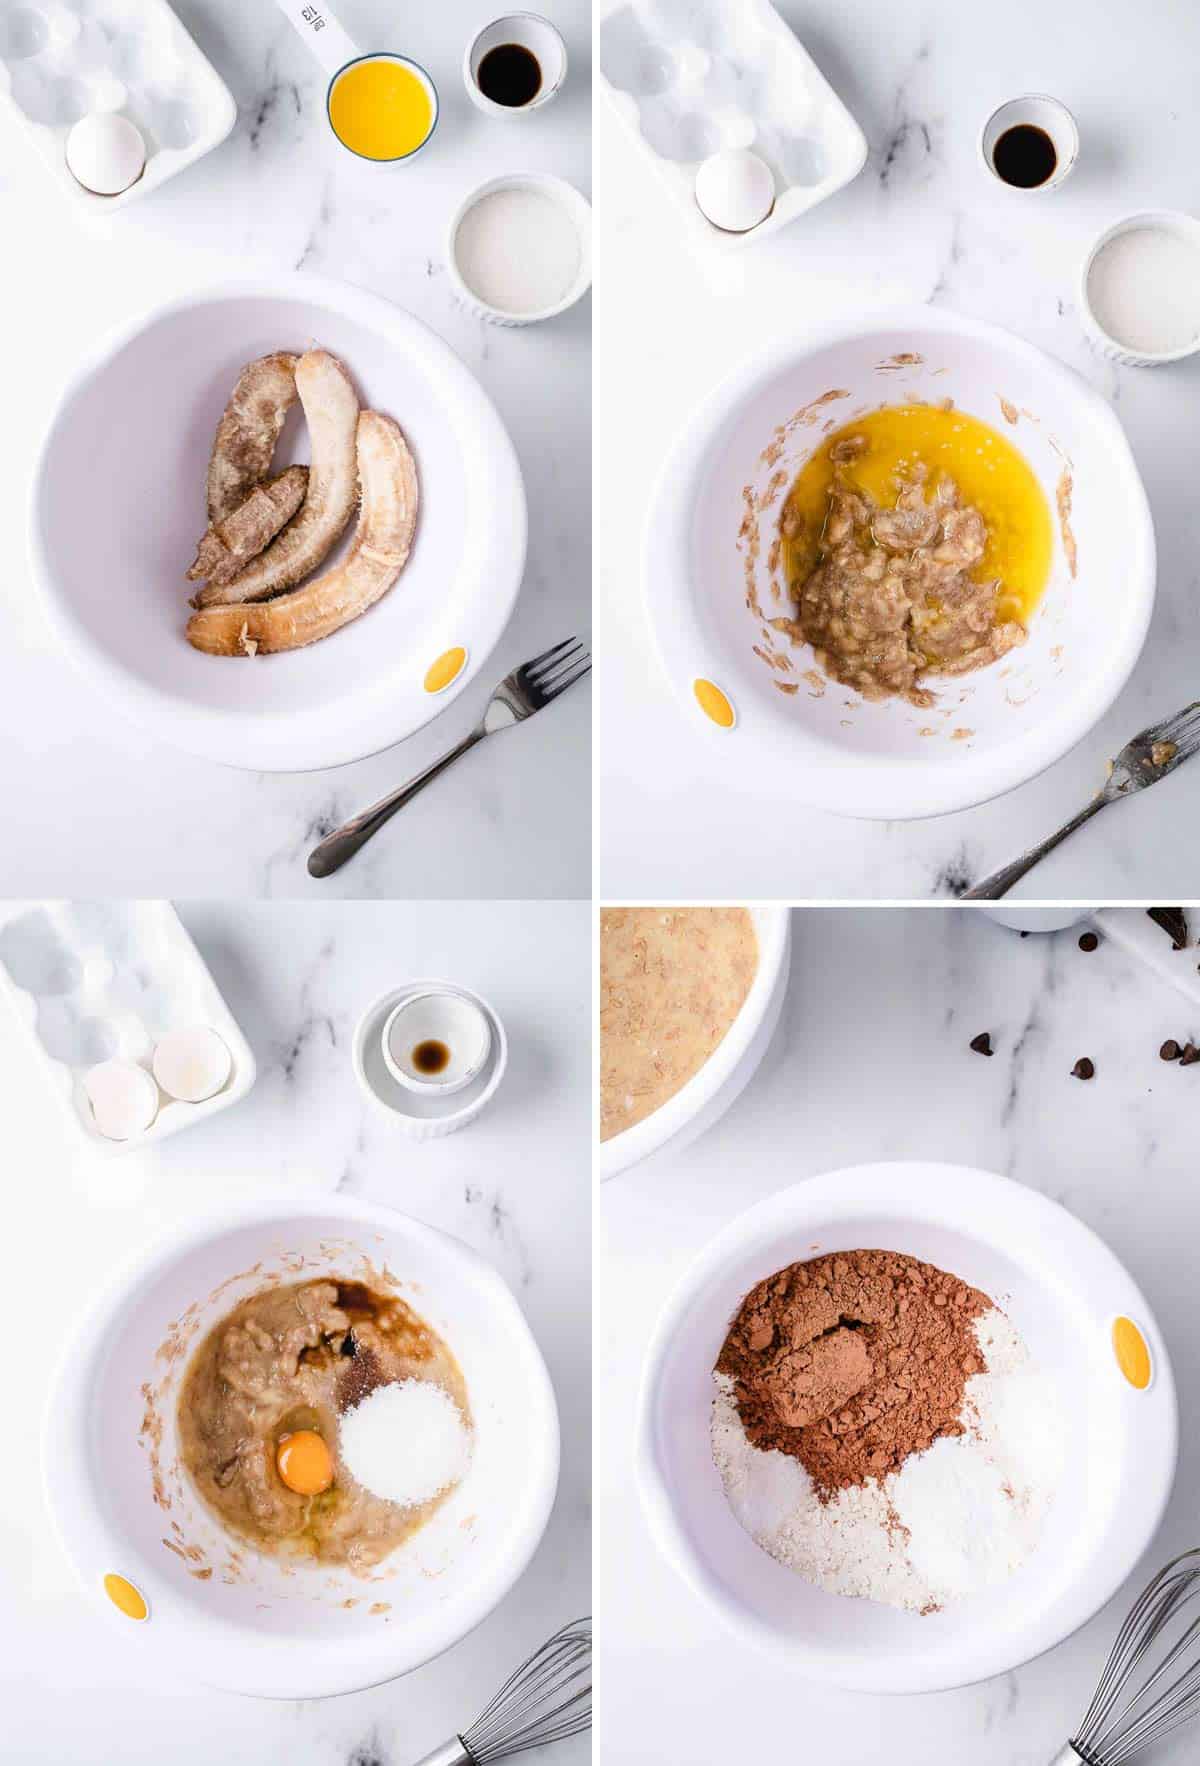 A collage shows how to make chocolate banana bread.